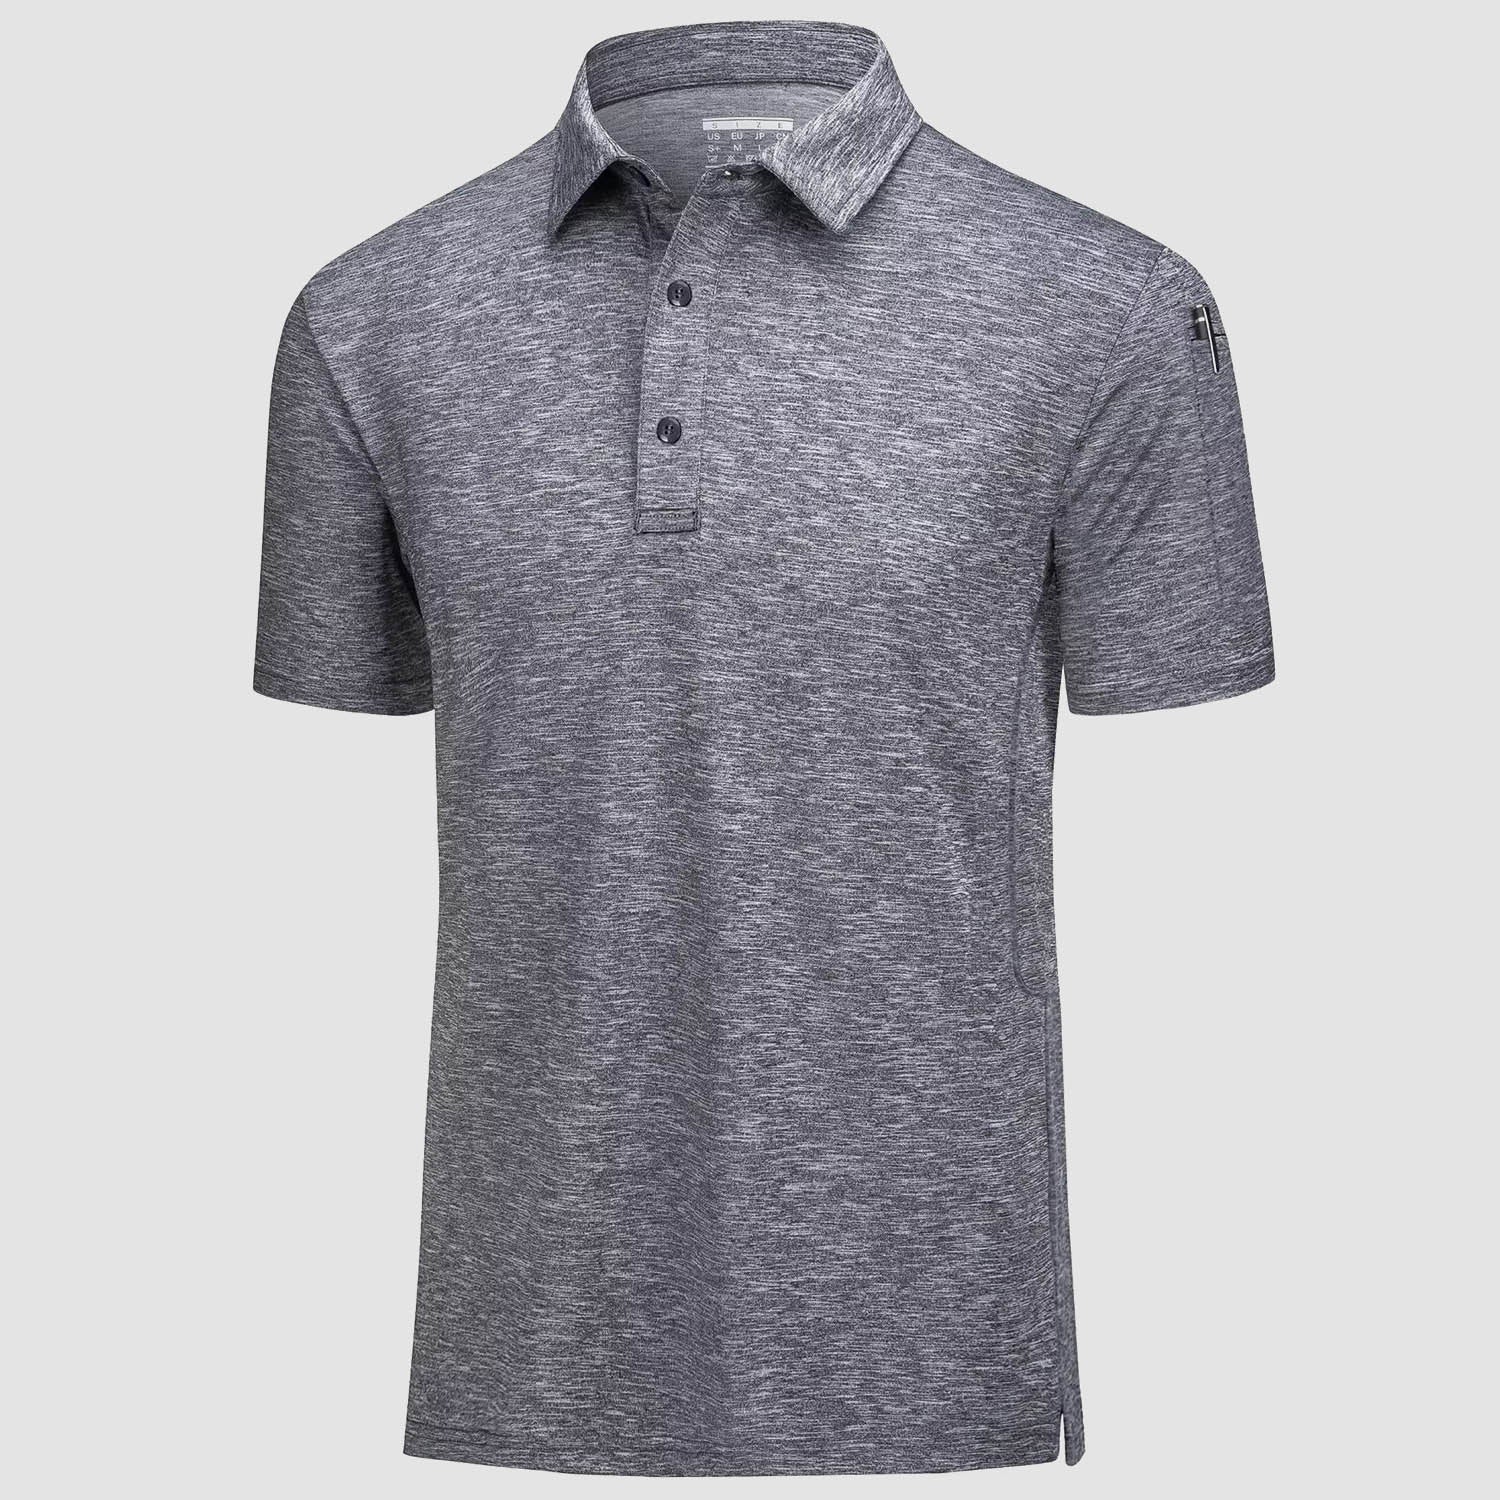 Men's Breathable T-shirt Quick Dry Golf Polo